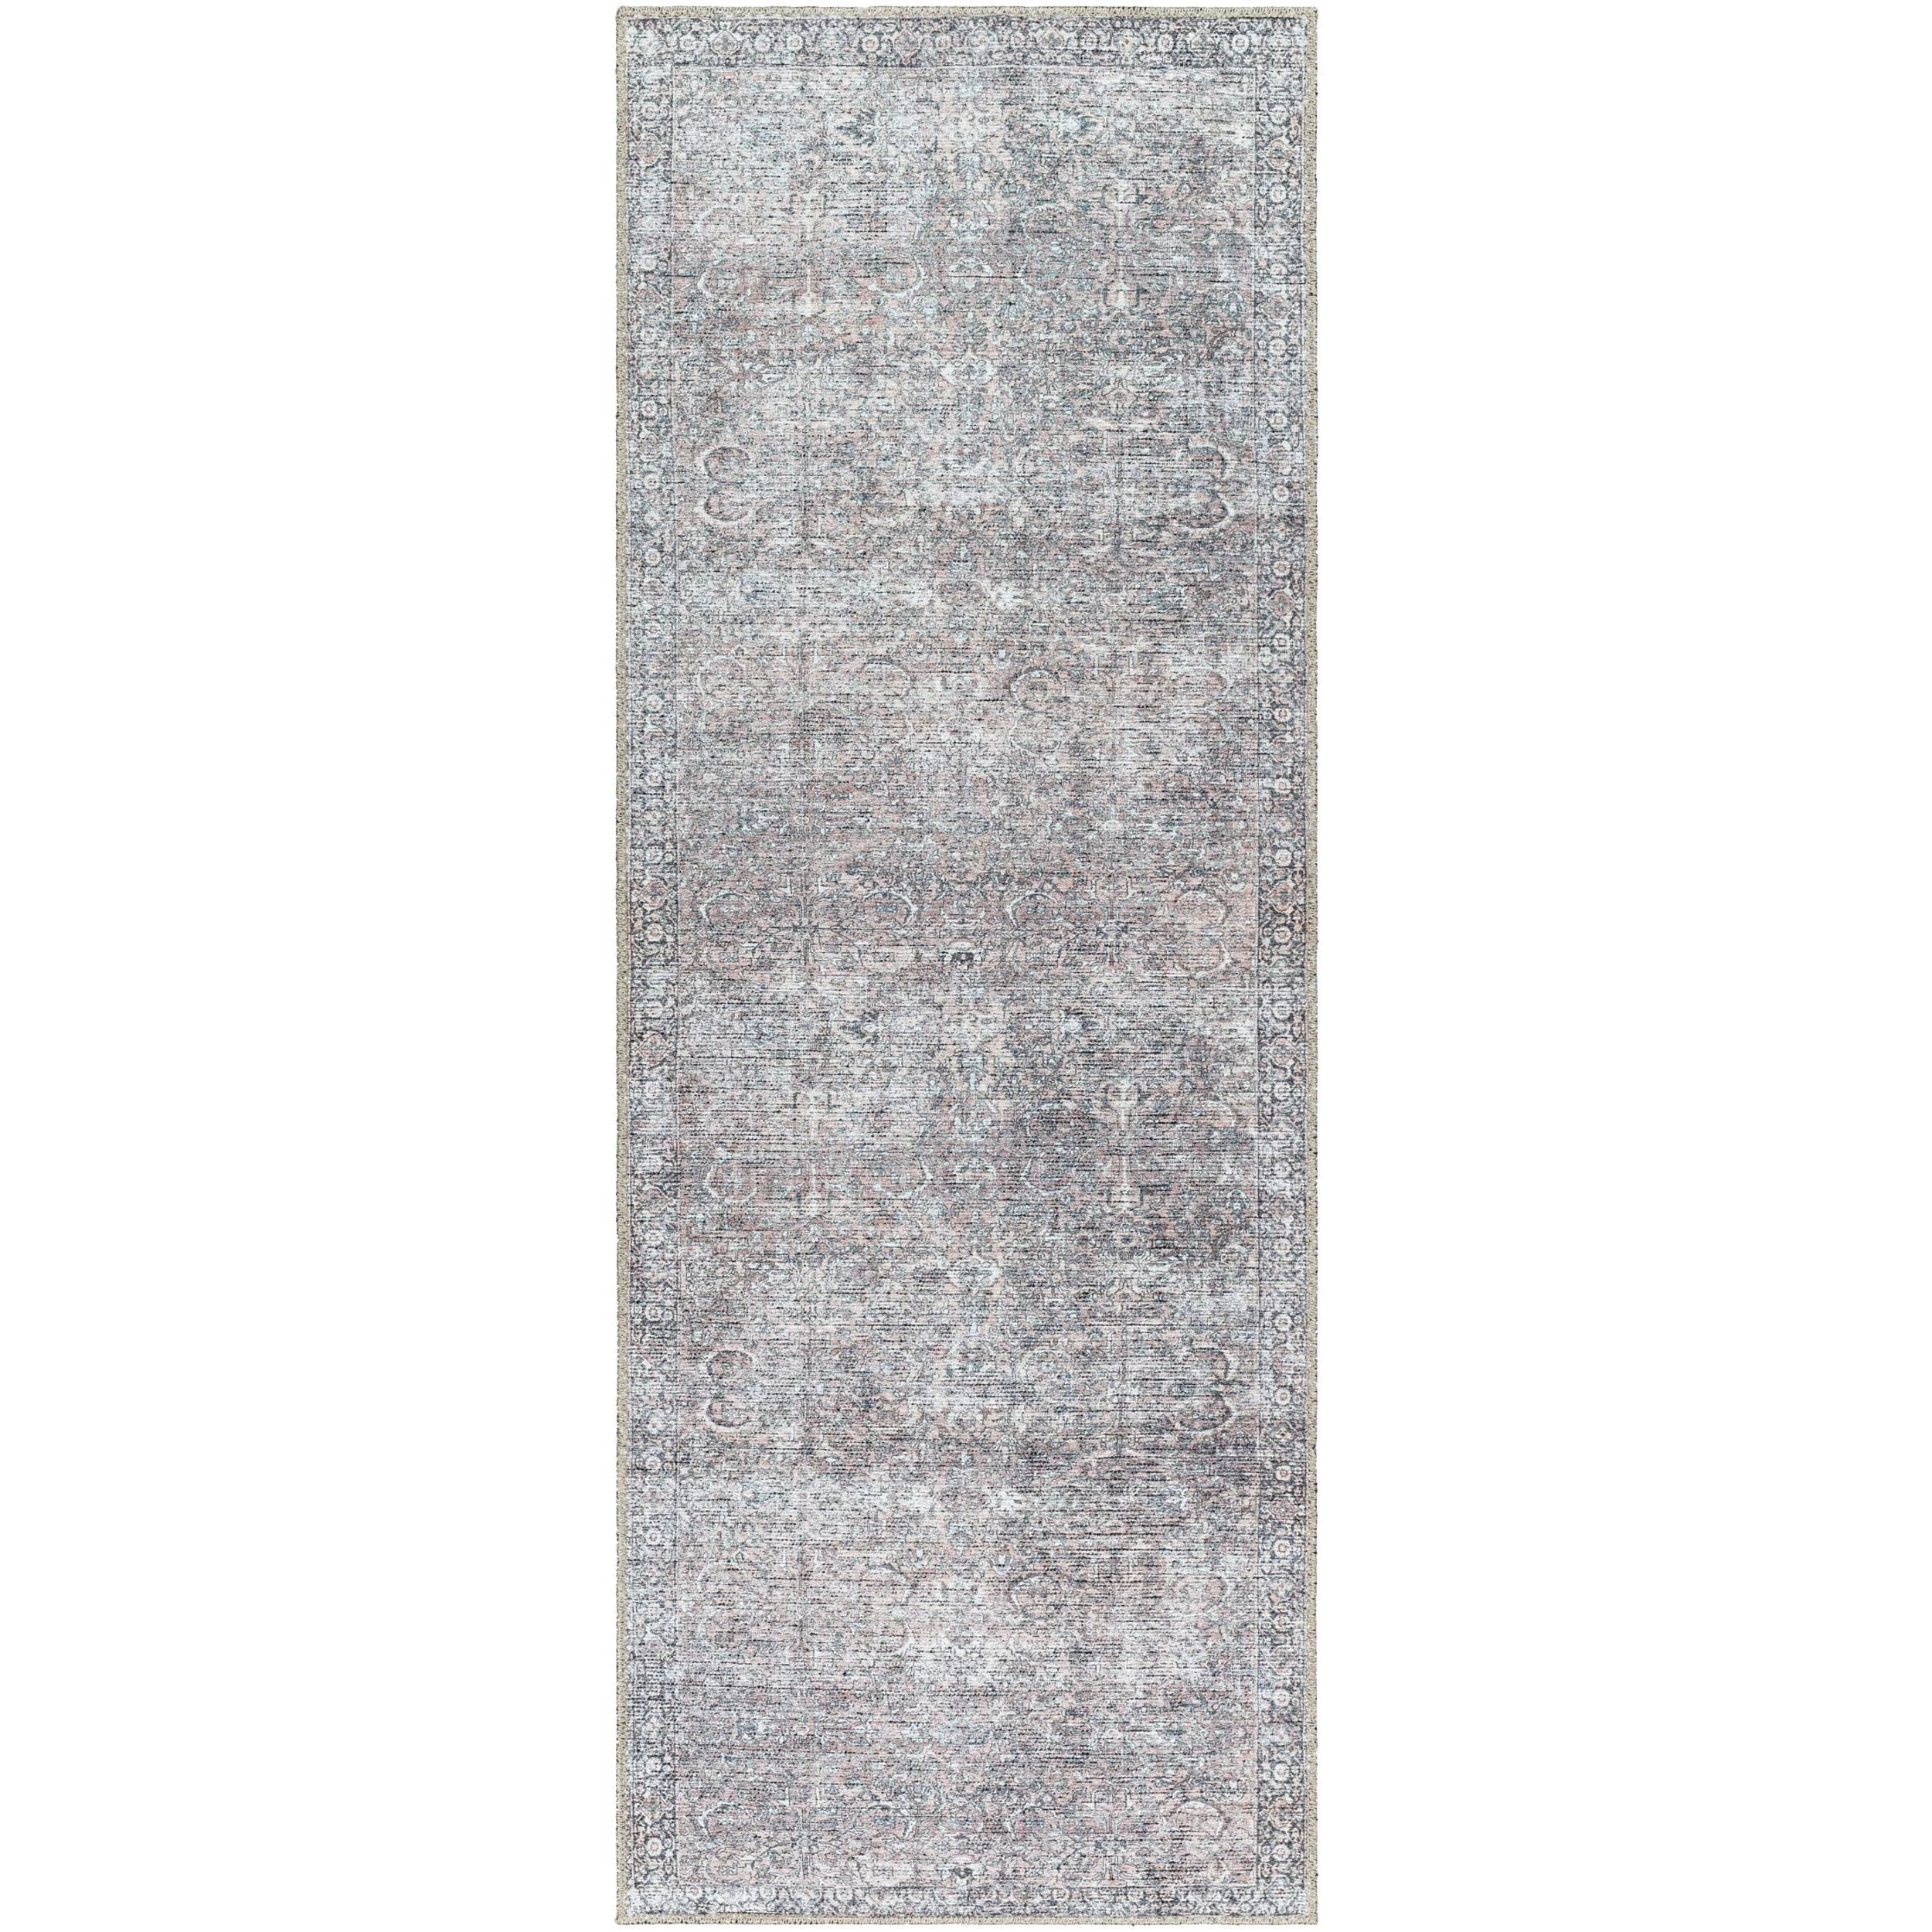 Better Homes & Gardens Persian Blooms Runner Washable Non-Skid Area Rug, Brown, 2'5" x 7' | Walmart (US)